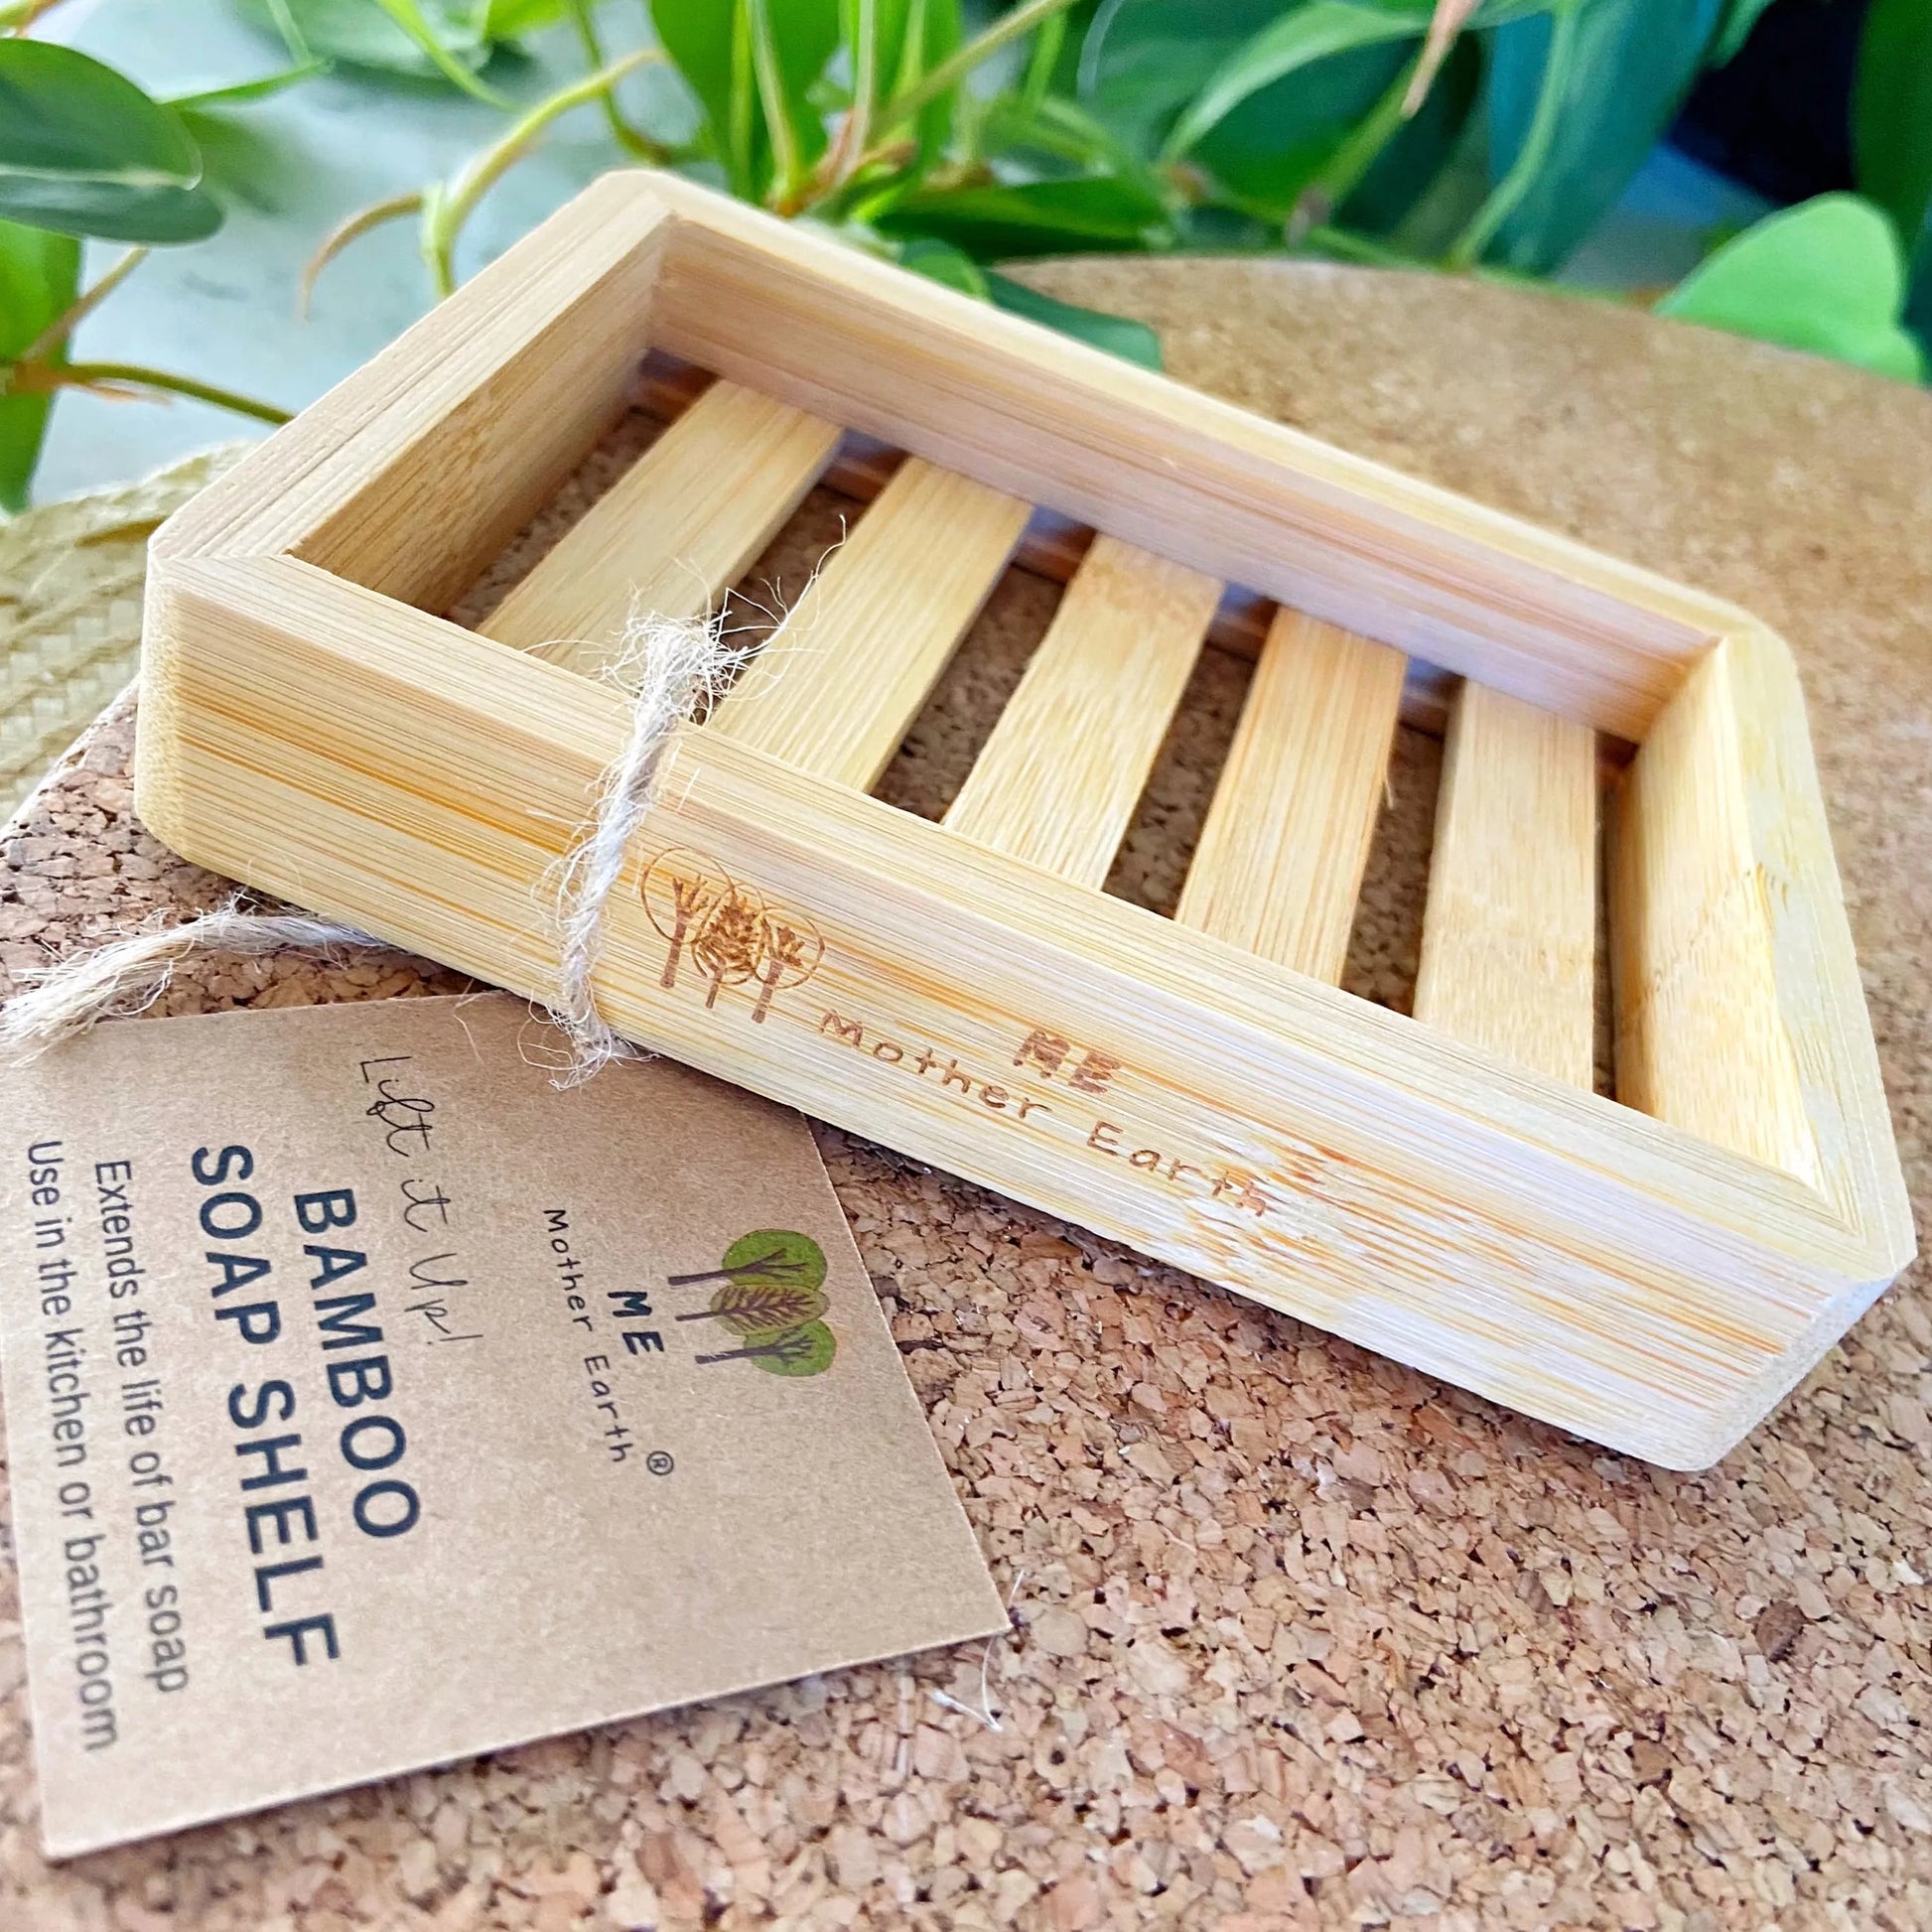 Bamboo soap dish side view